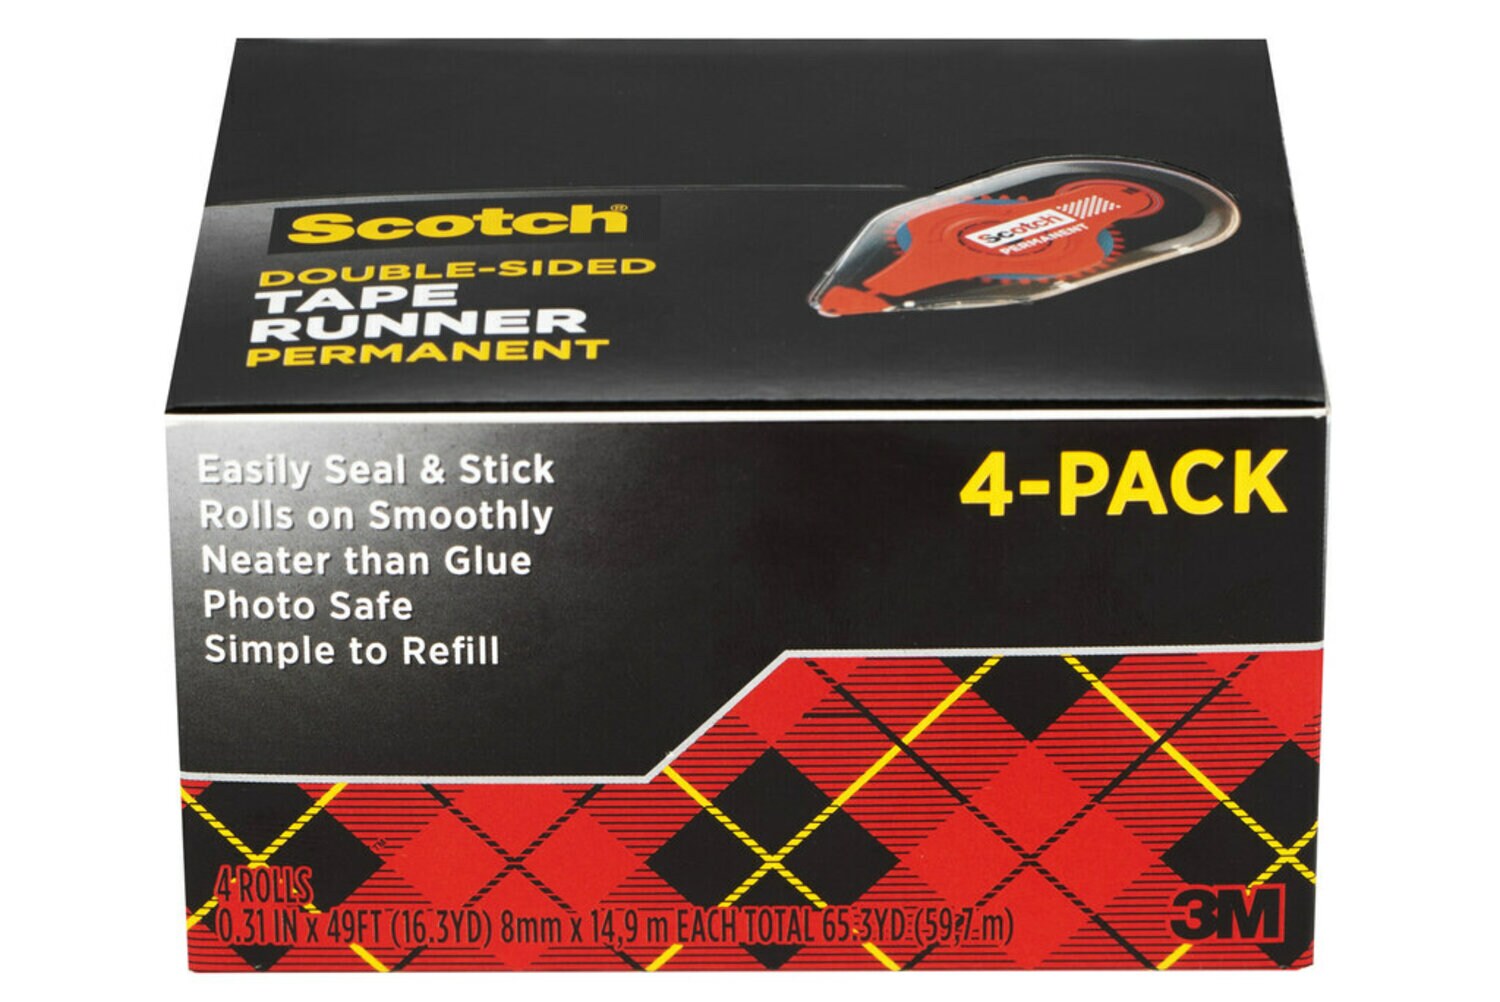 7100238371 - Scotch Tape Runners 6055BNS, .31 in x 16.3 yd (7.92 mm x 14.9 m), Value Pack, 4 Pack